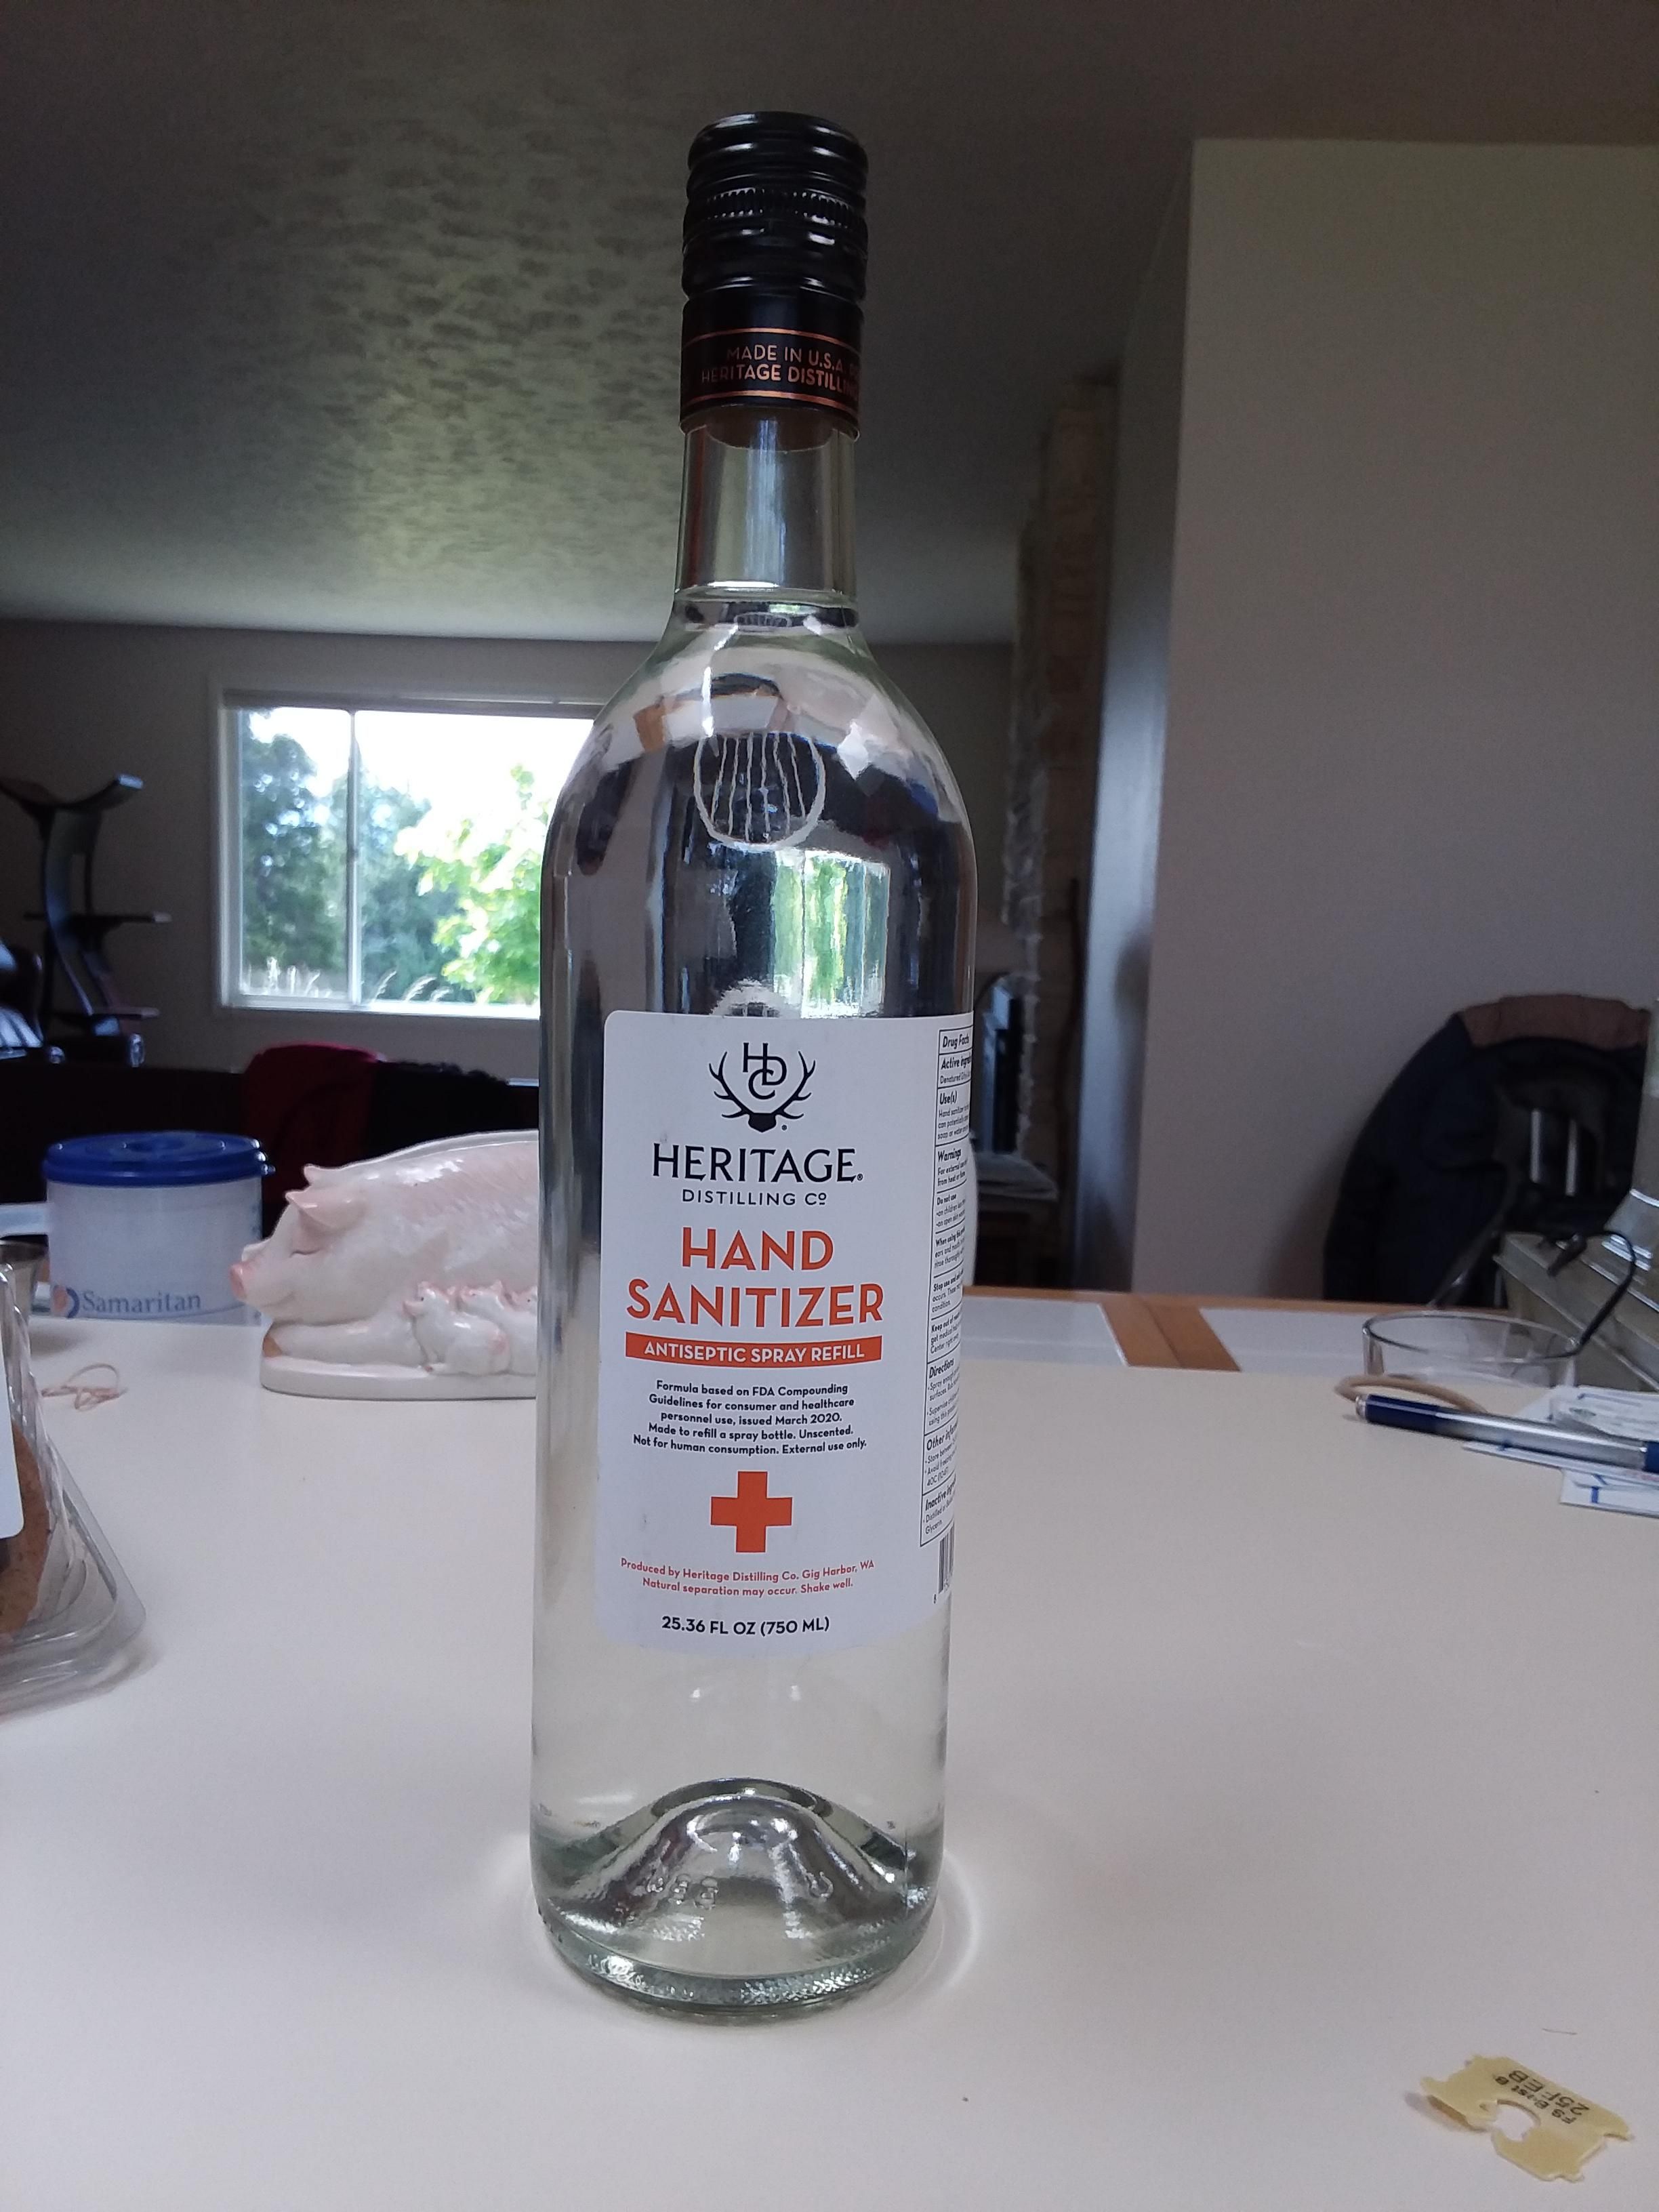 The local distillery is making hand sanitizer, but they've only got one kind of bottle...